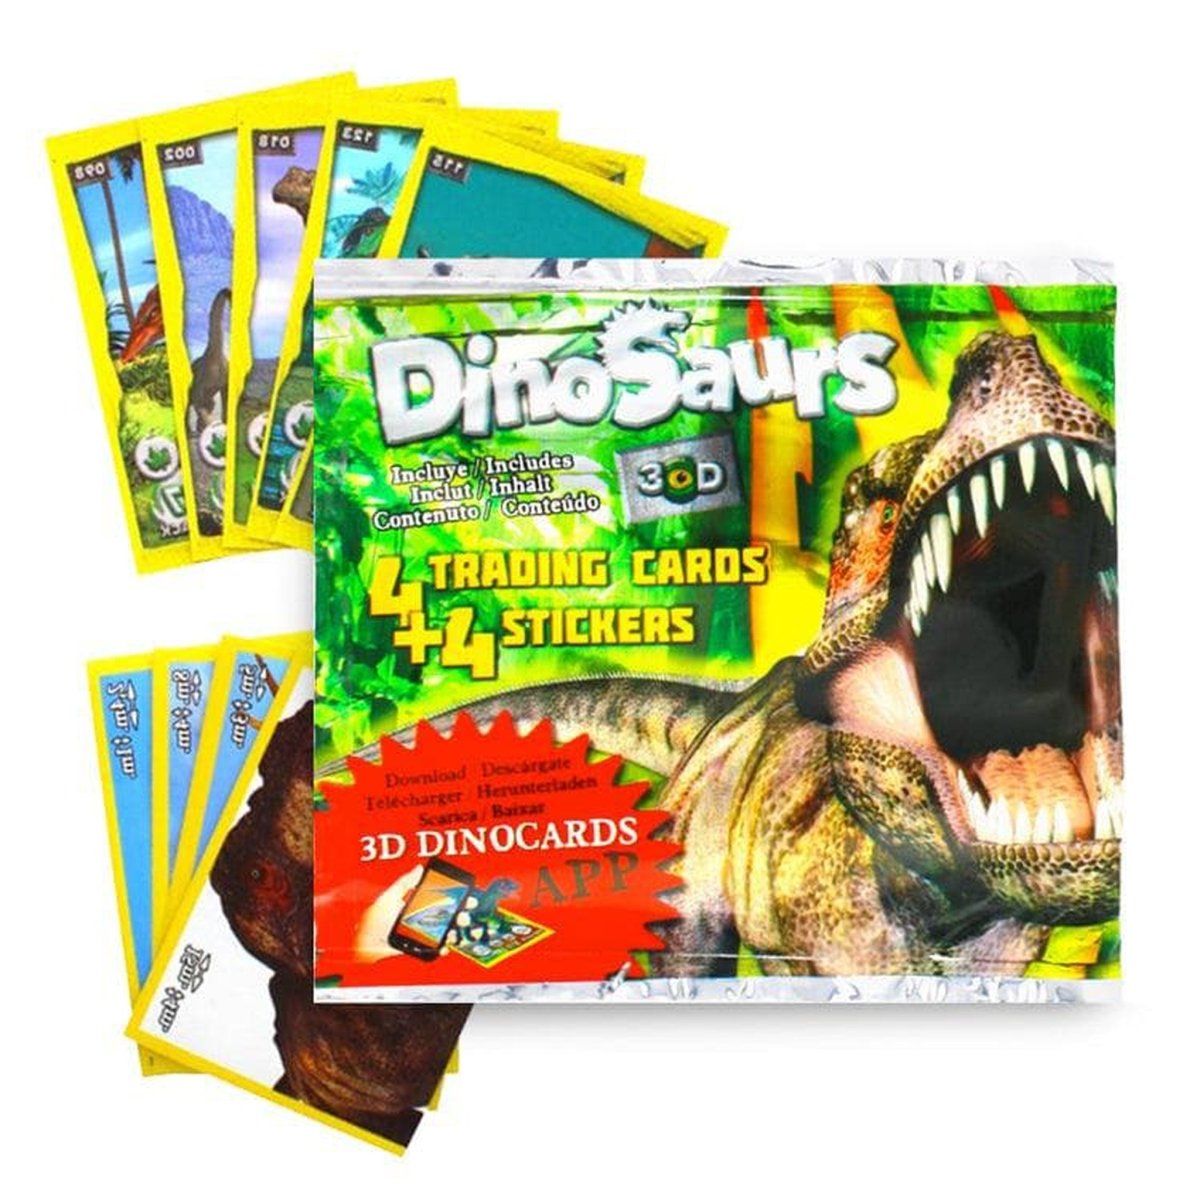 Dinosaurs Sticker/Trading Card Blind Bag - Kids Party Craft